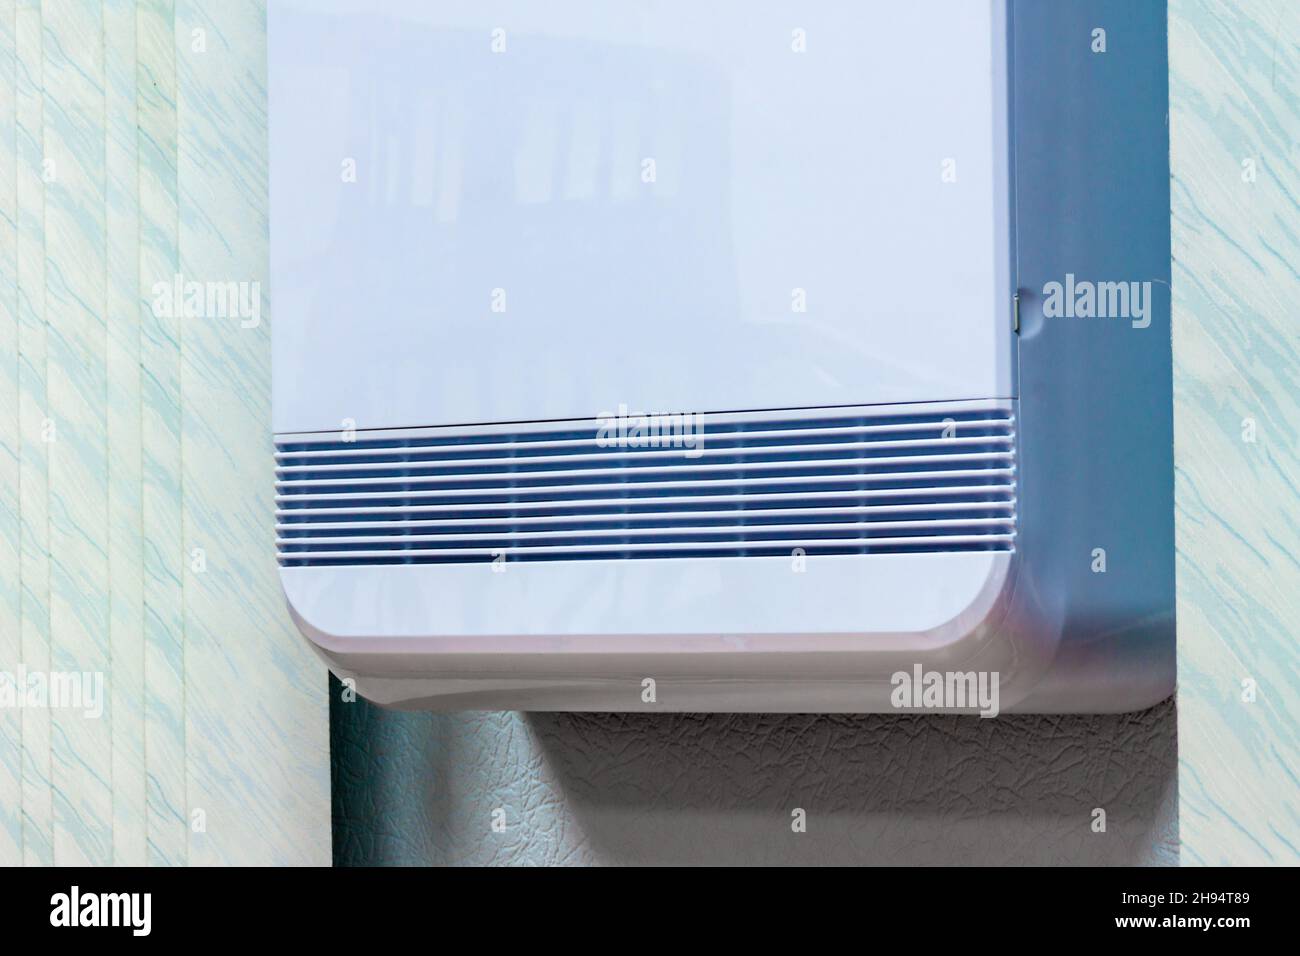 ventilation openings of a device in a white plastic case mounted on a wall in an office or apartment, selective focus Stock Photo